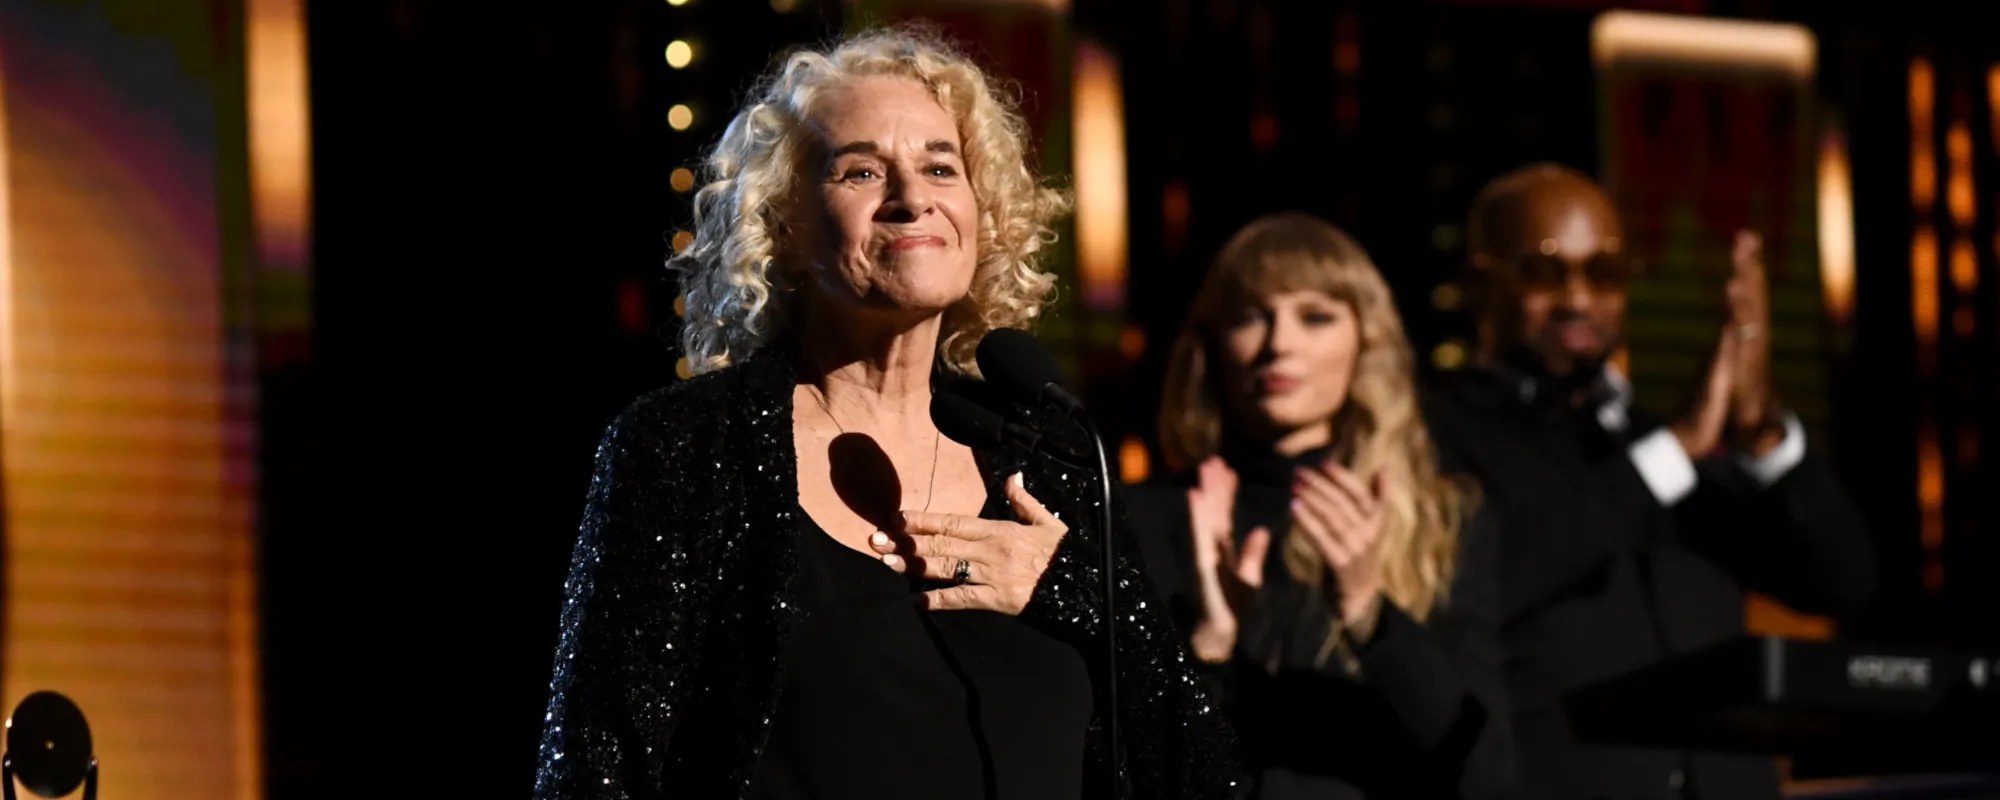 Rock and Roll Hall of Fame Inducts Big Names—Carole King, Jay Z, Foo Fighters, Tina Turner, and More